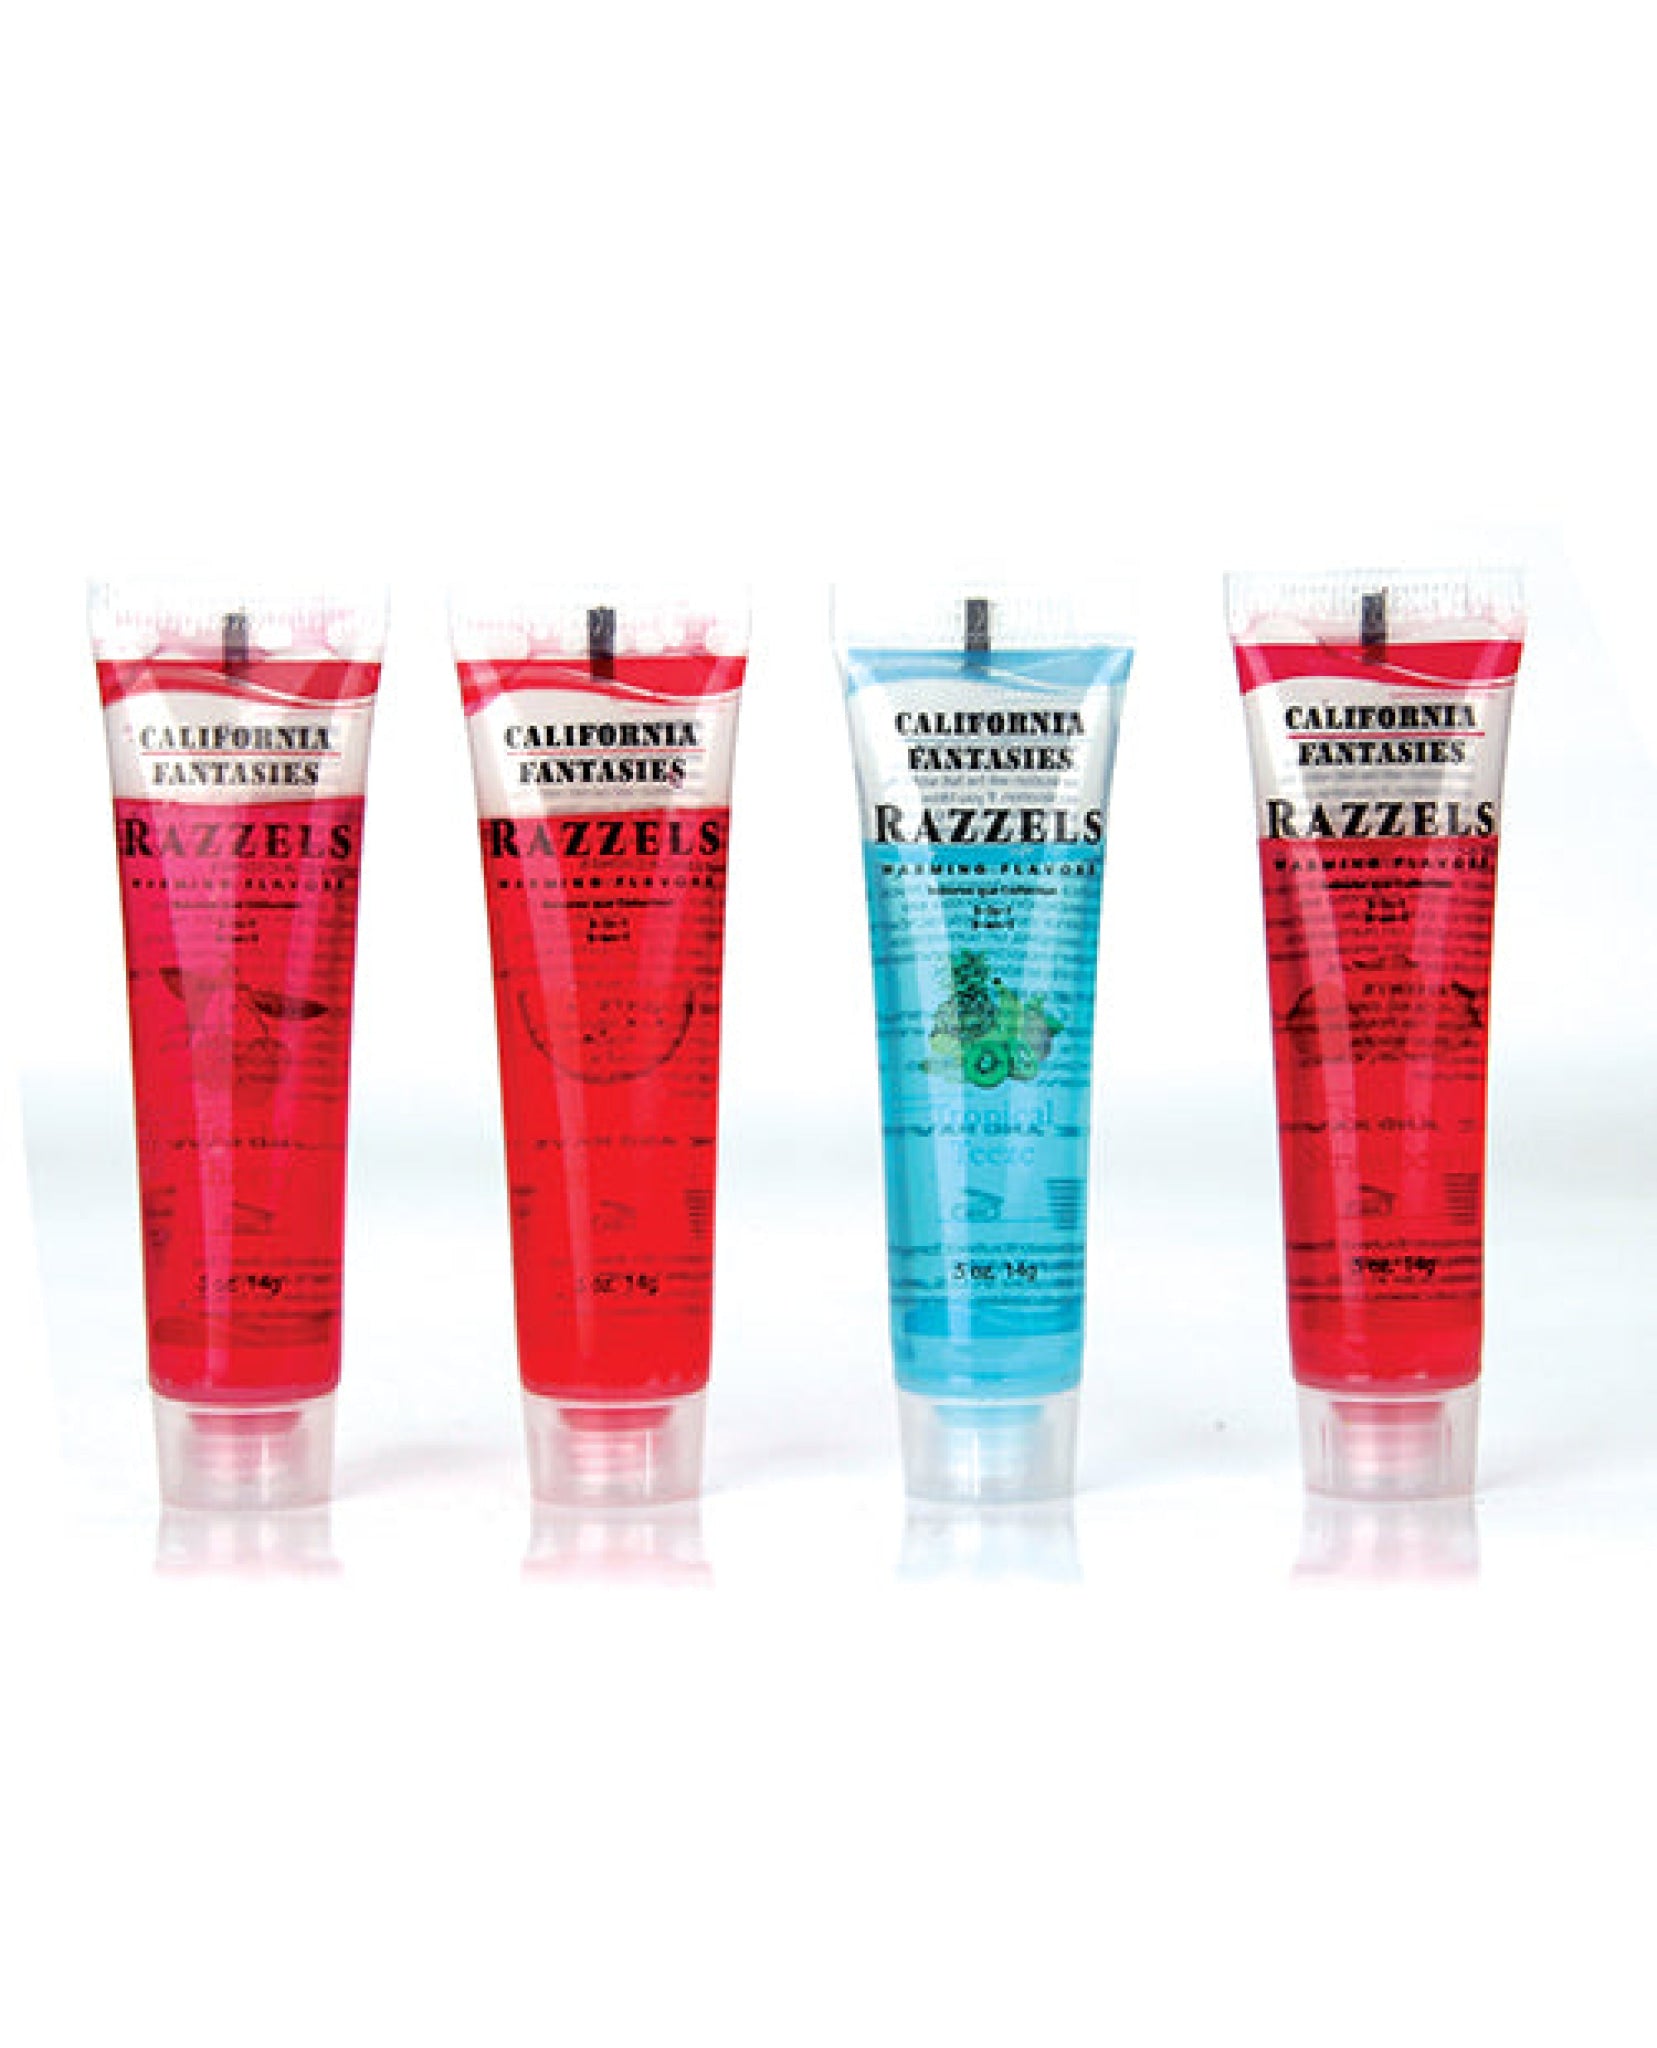 Razzels 3 in 1 Warming Lubricant  - .5 oz Tube Asst. Flavors Bowl of 52 California Fantasies